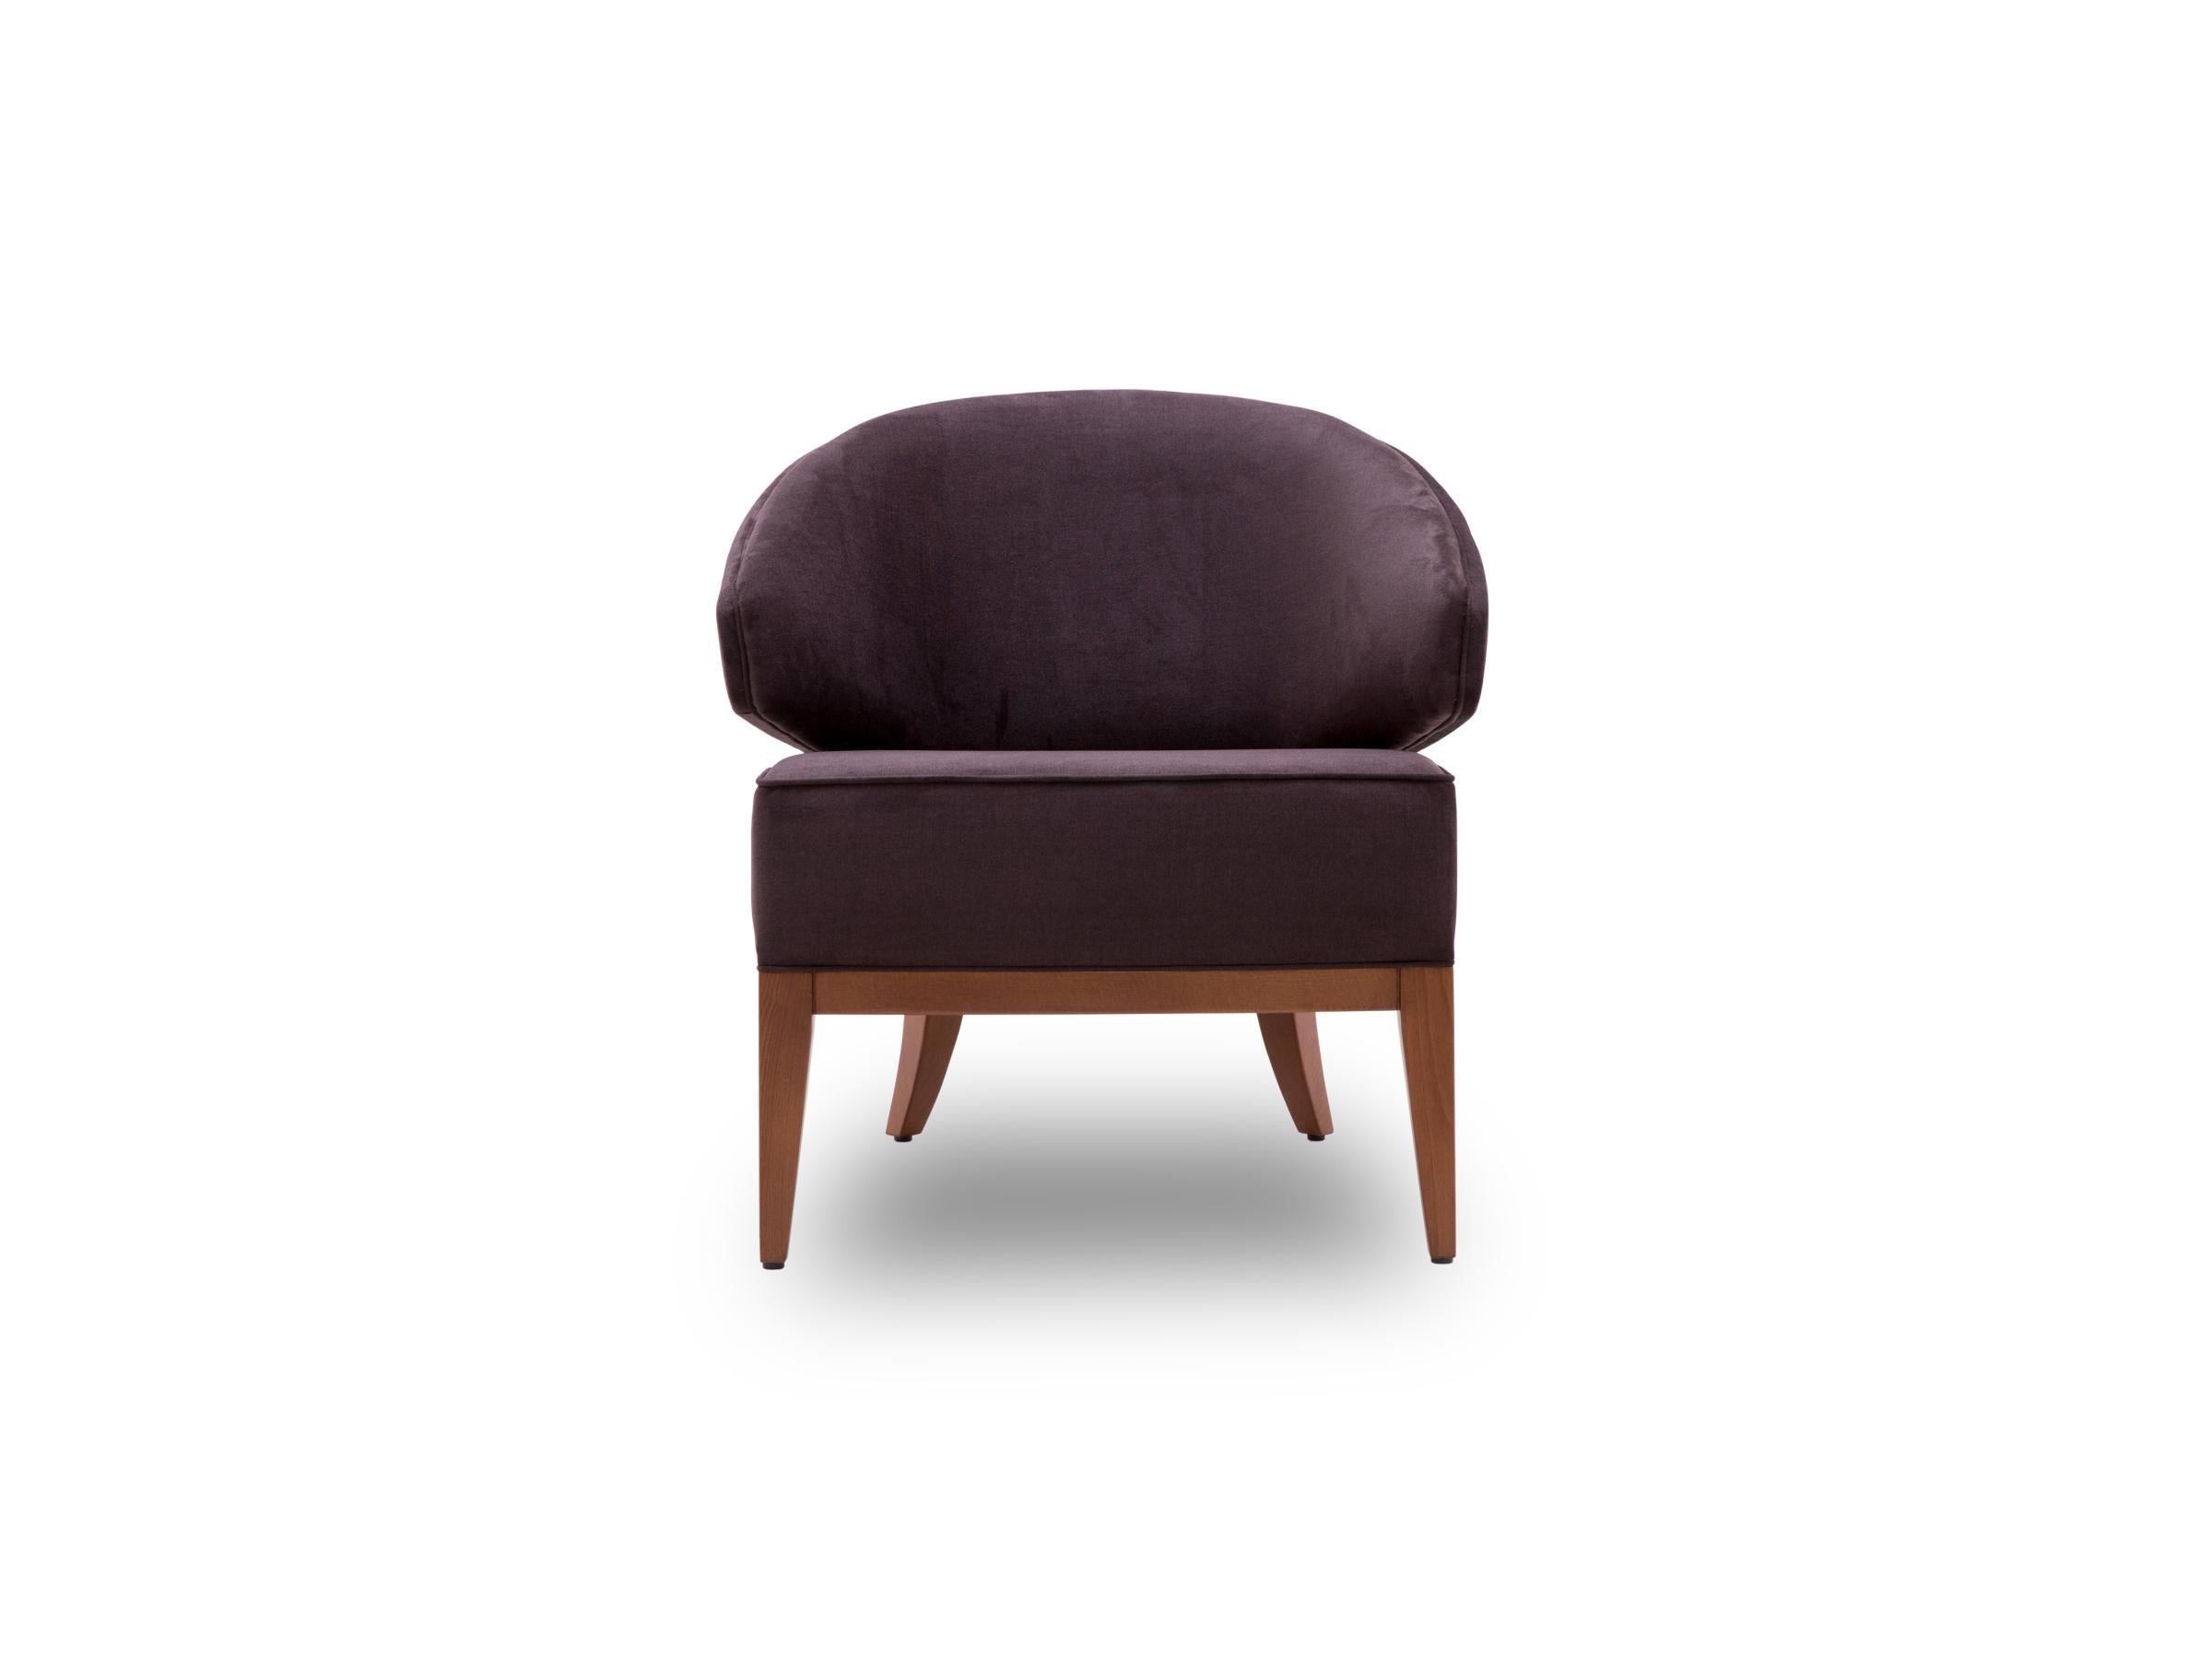 Twice Armchair's elegant curves are engineered with comfort to be a lasting addition to your home. Designed with premium style details such as piping and angled legs to deliver elegant simplicity. With its rounded back structure, aesthetic armrests